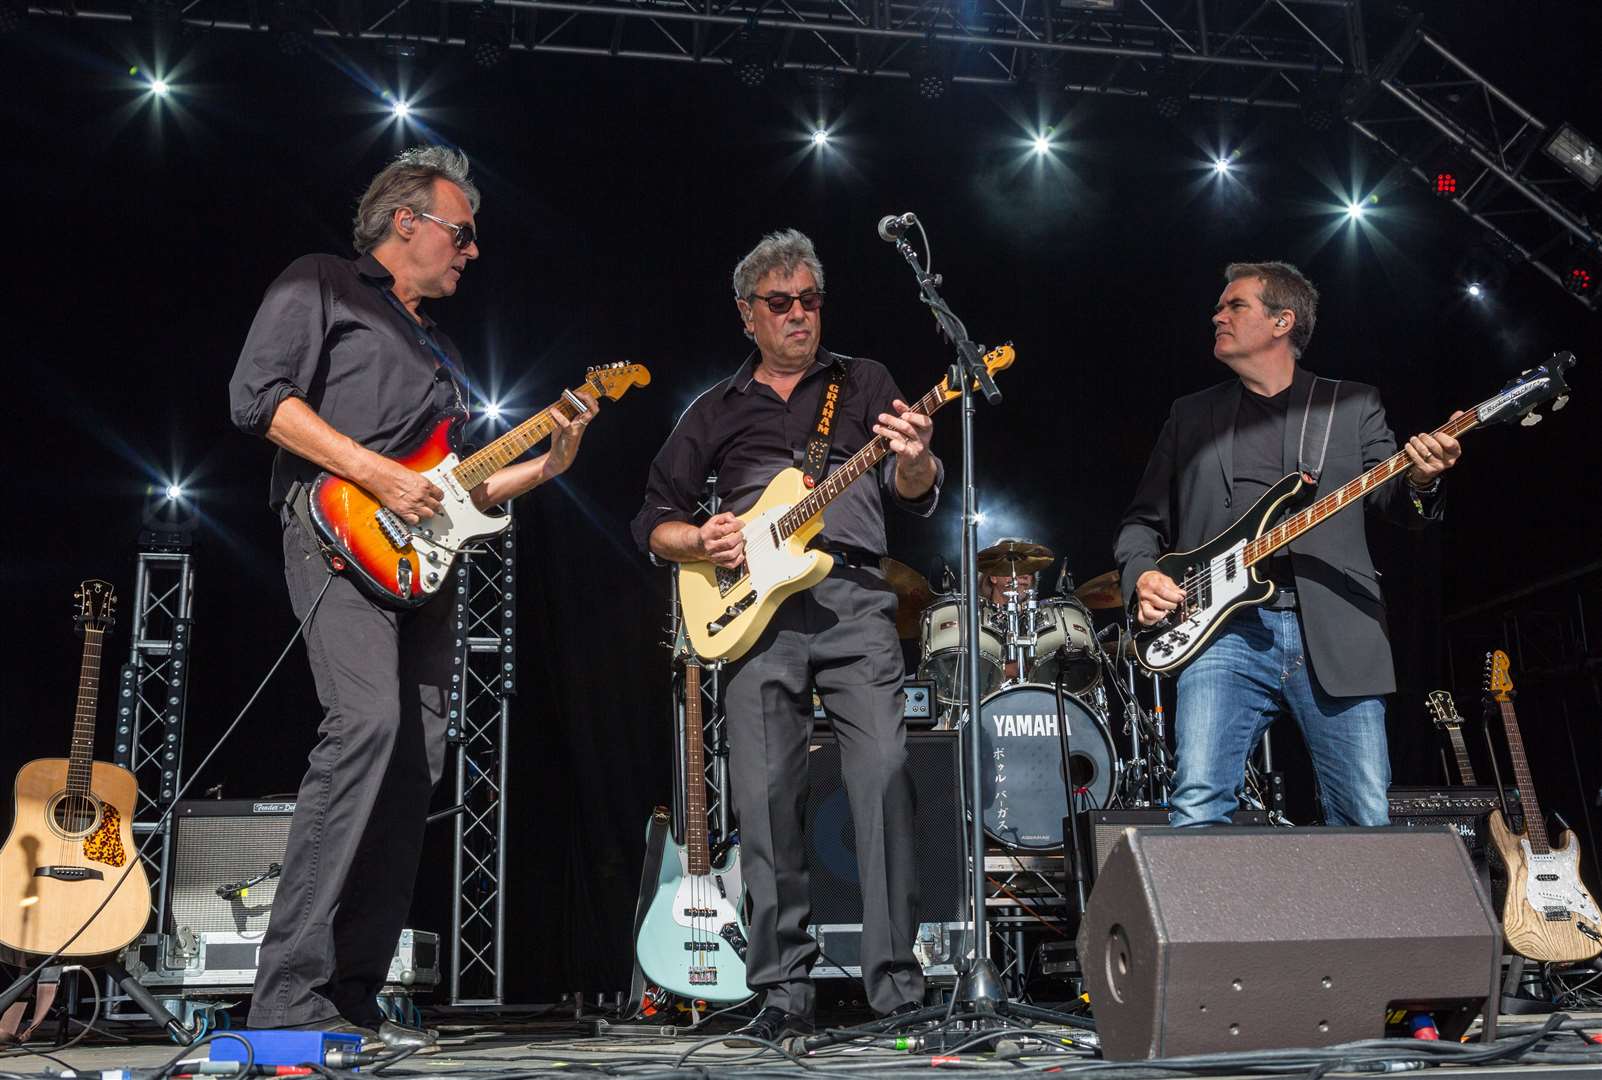 10cc have performed in Kent previously at the Hop Farm in Paddock Wood. Picture: Martin Apps